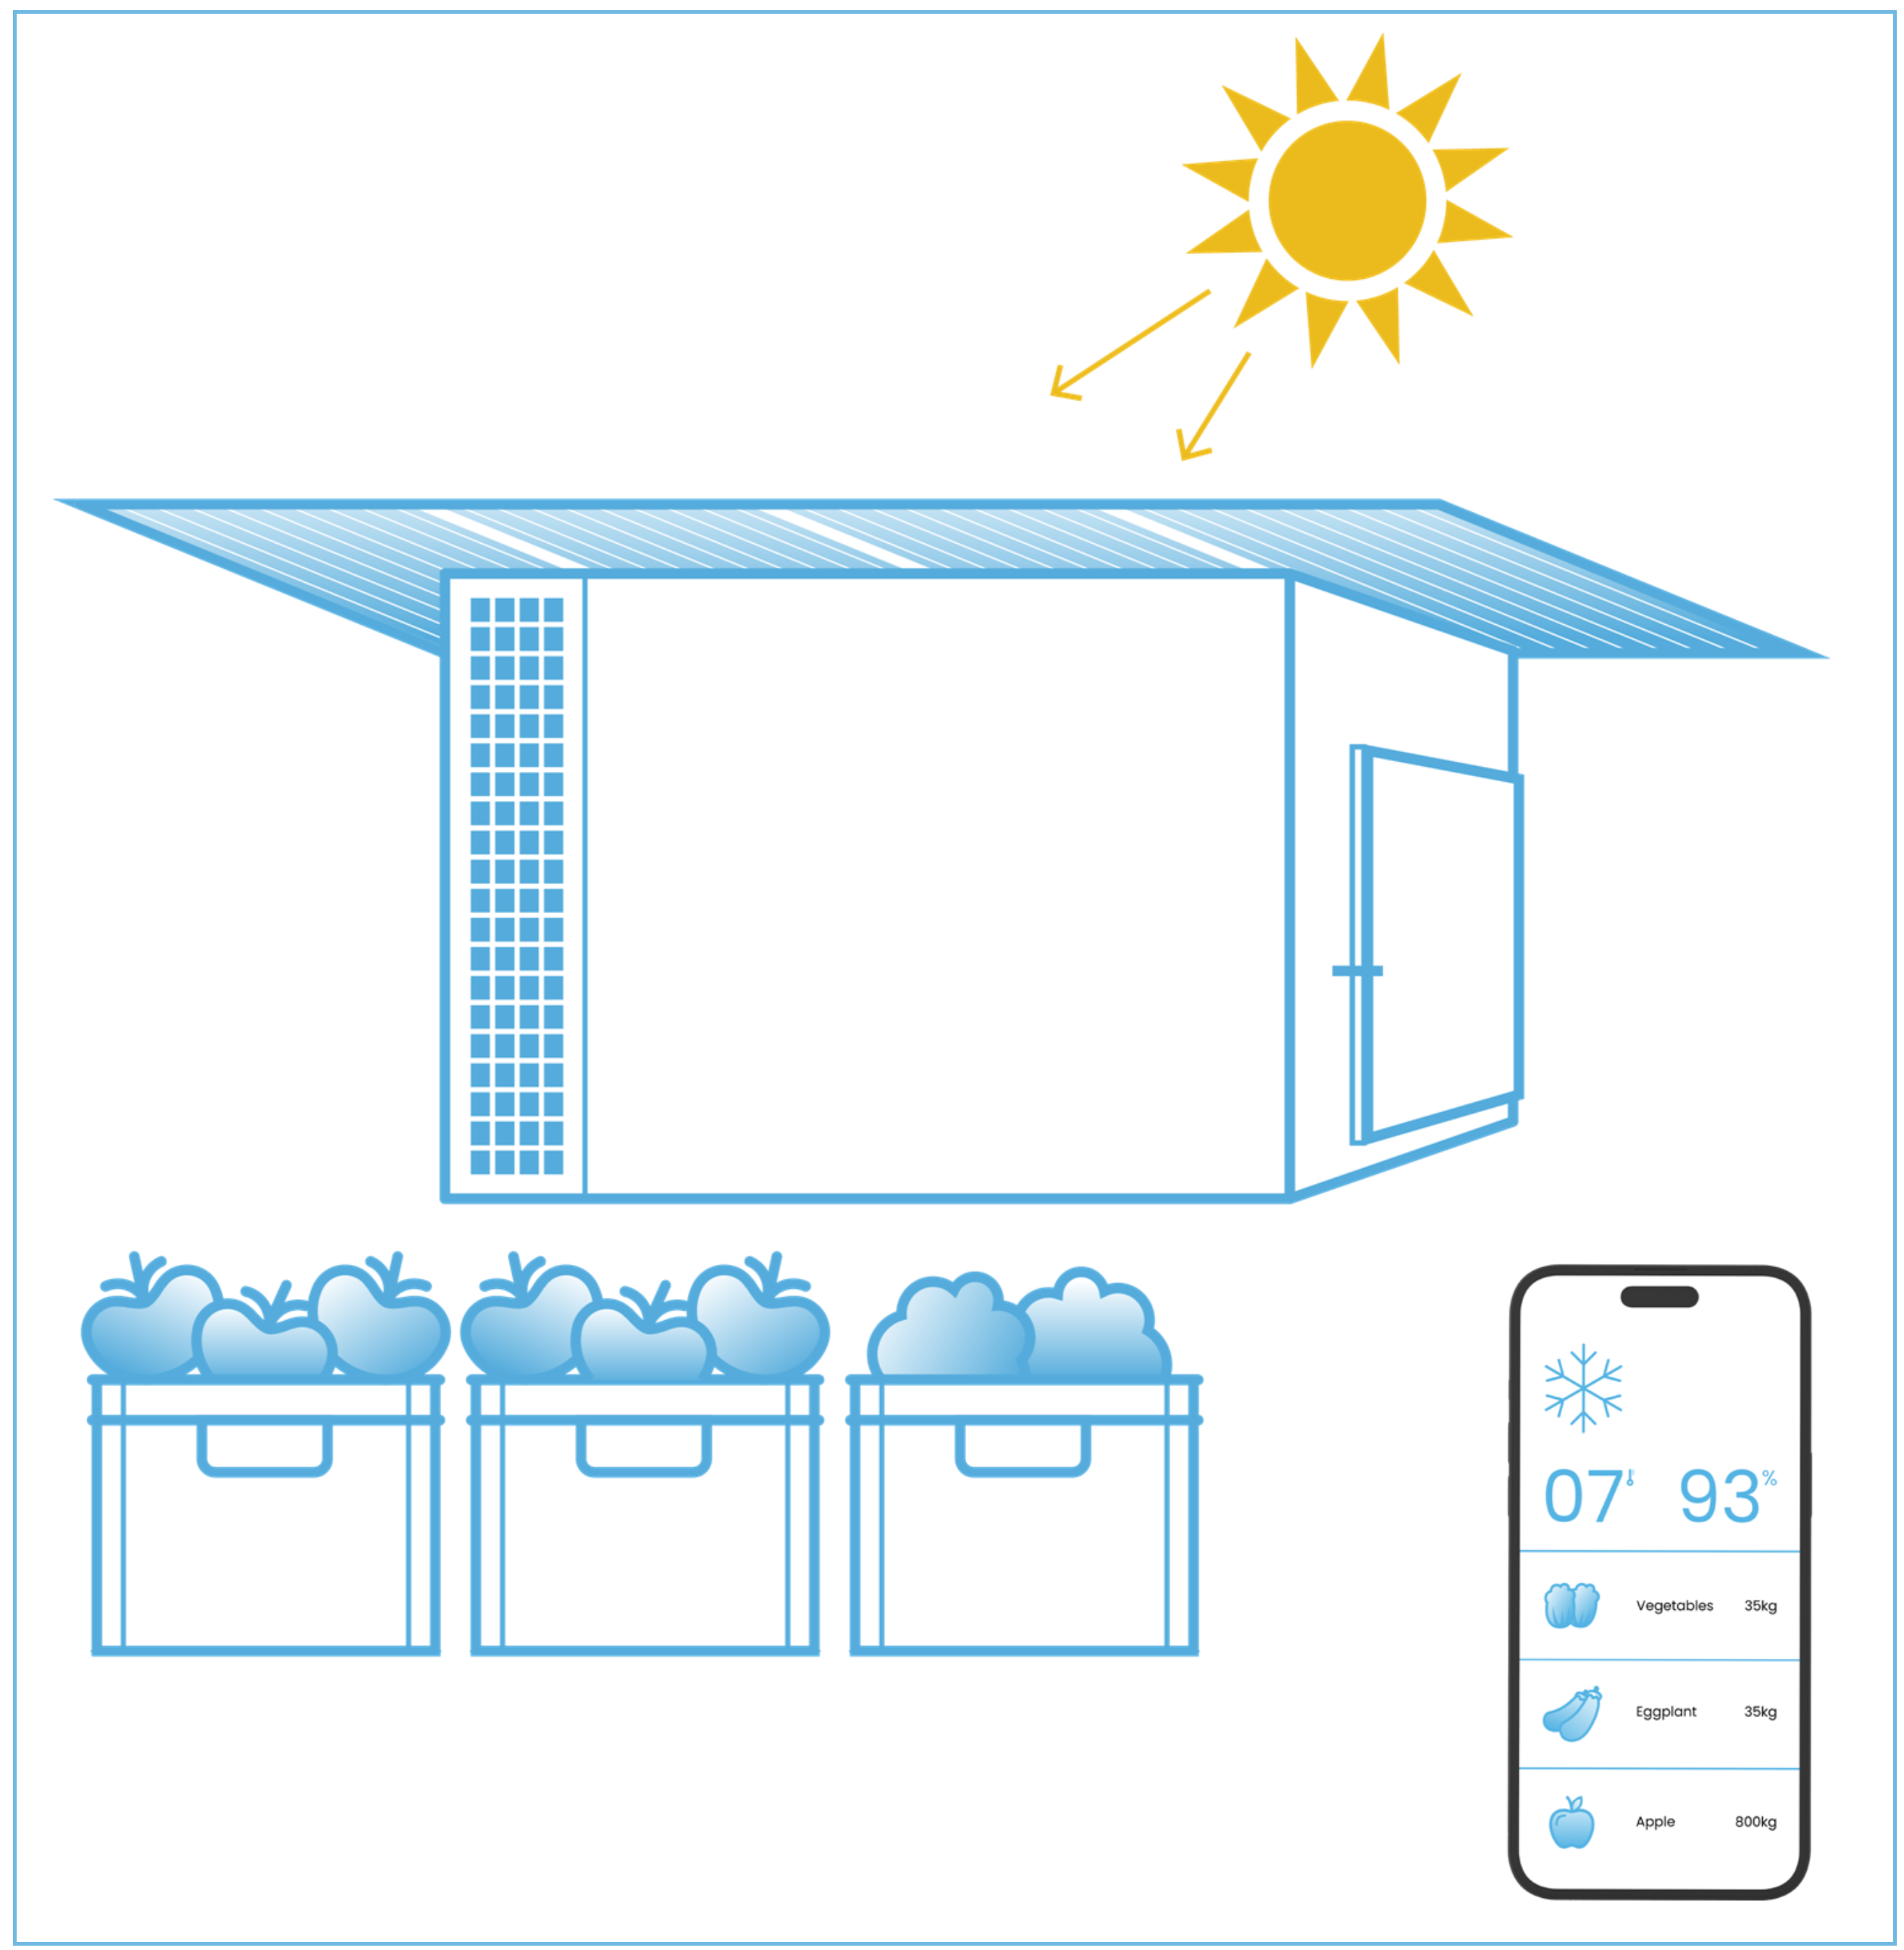 Schematic diagram of Oonnayan Solar Cold Storage and accompanying app for monitoring the produce shelf life (1)